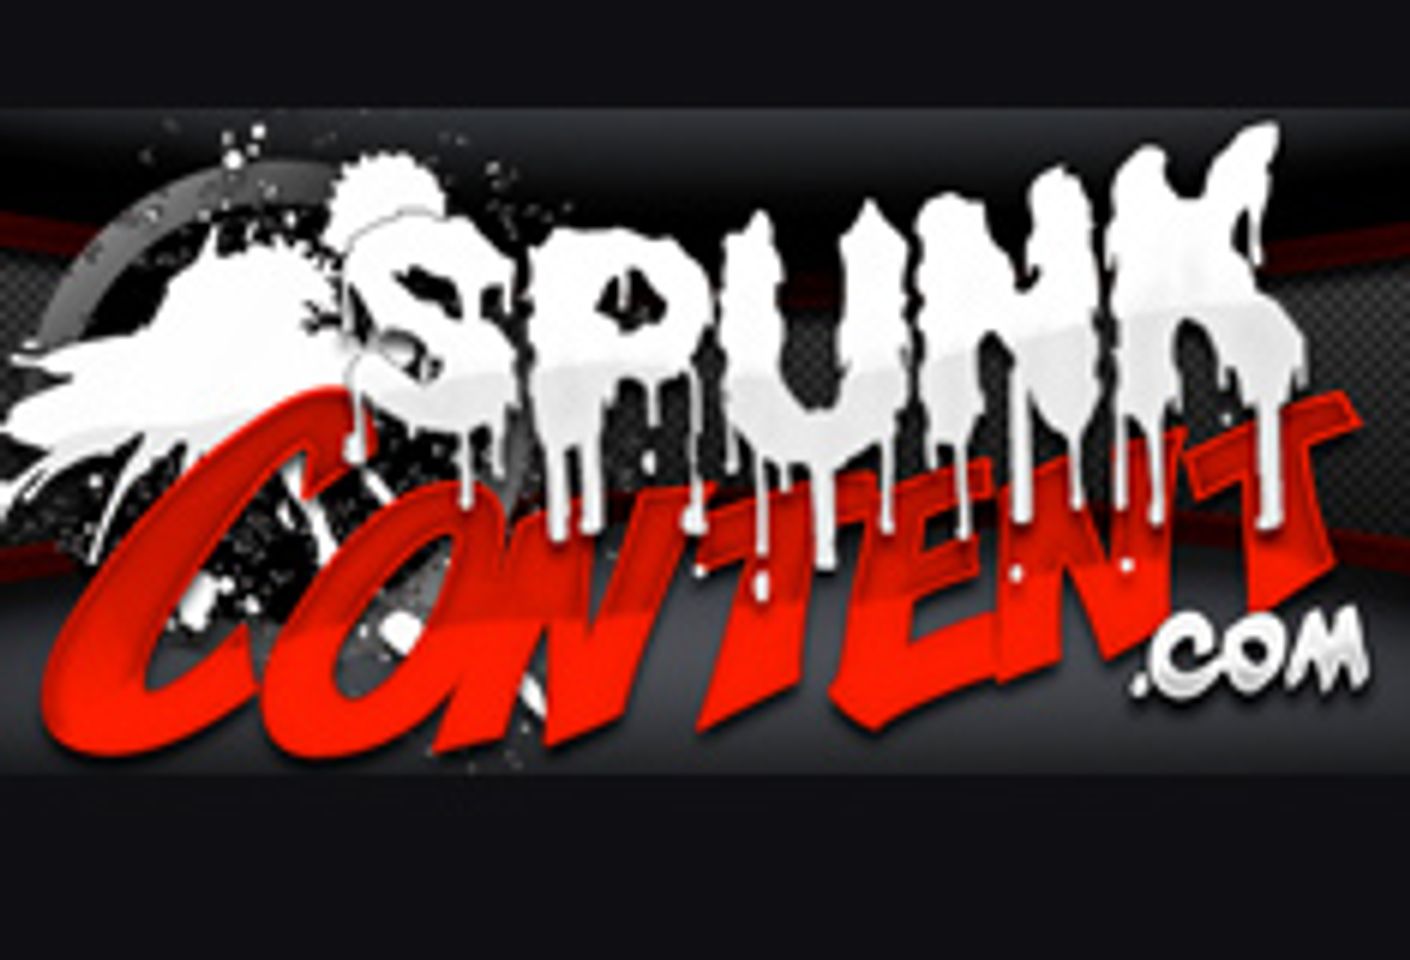 SpunkContent.com Offers Flash Video and Half Price For New Customers